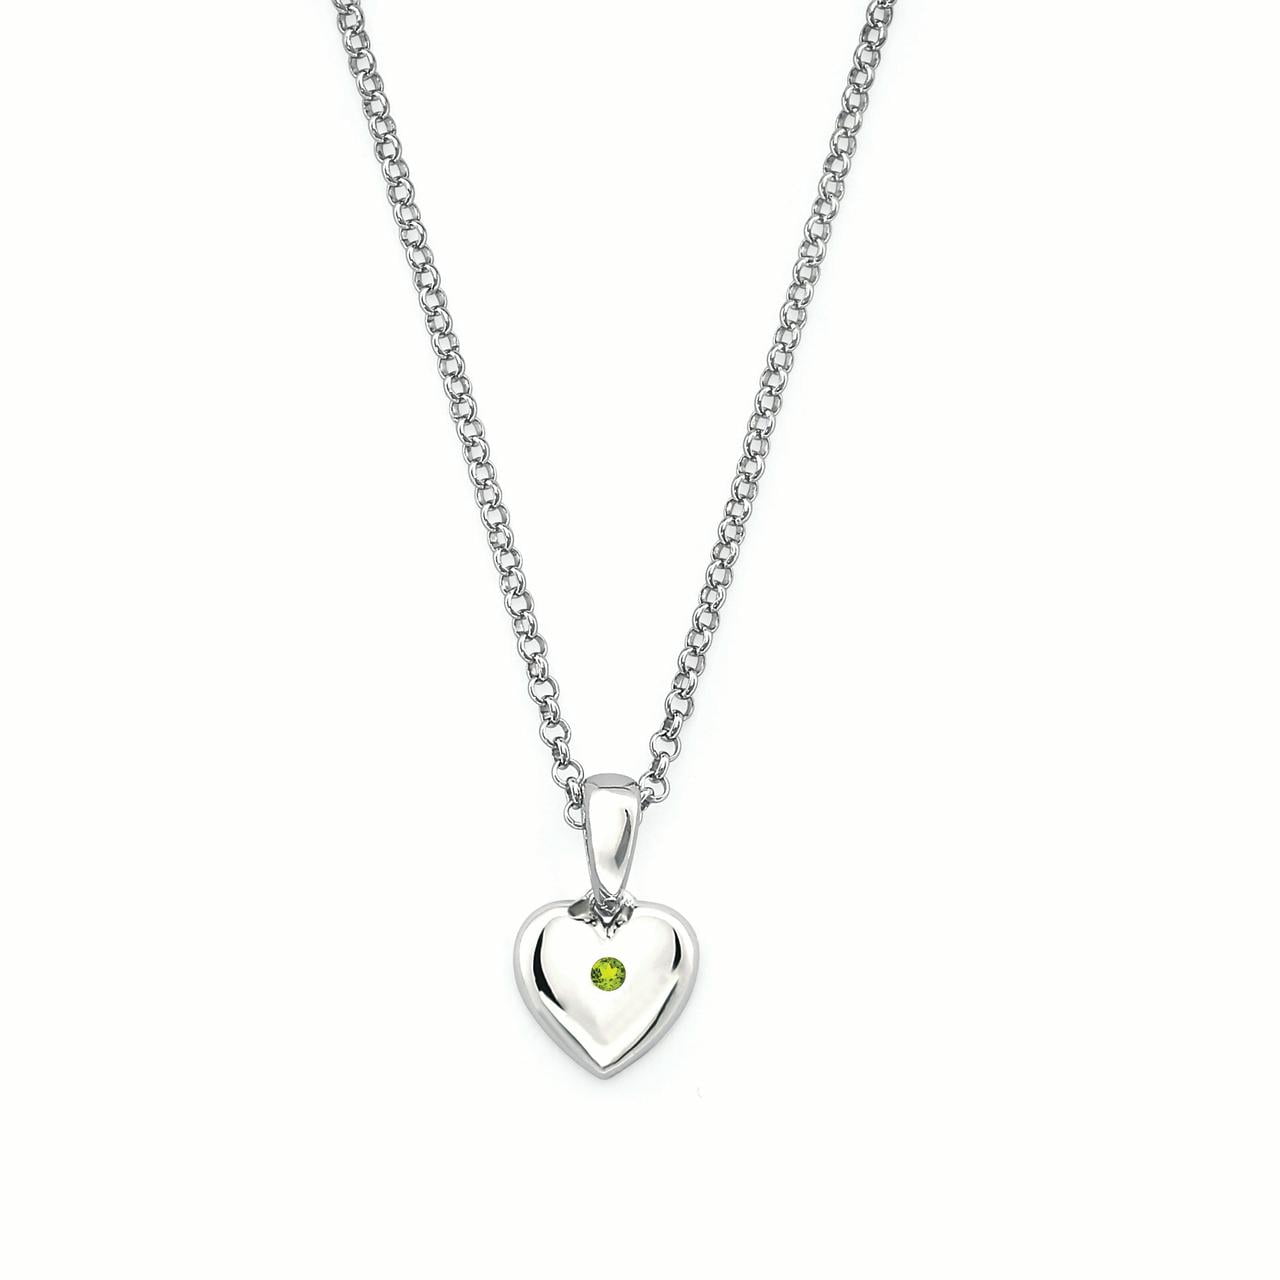 LADIES AUGUST PERIDOT BIRTHSTONE NECKLACE PENDANT STERLING SILVER 925 //ROSE GOLD